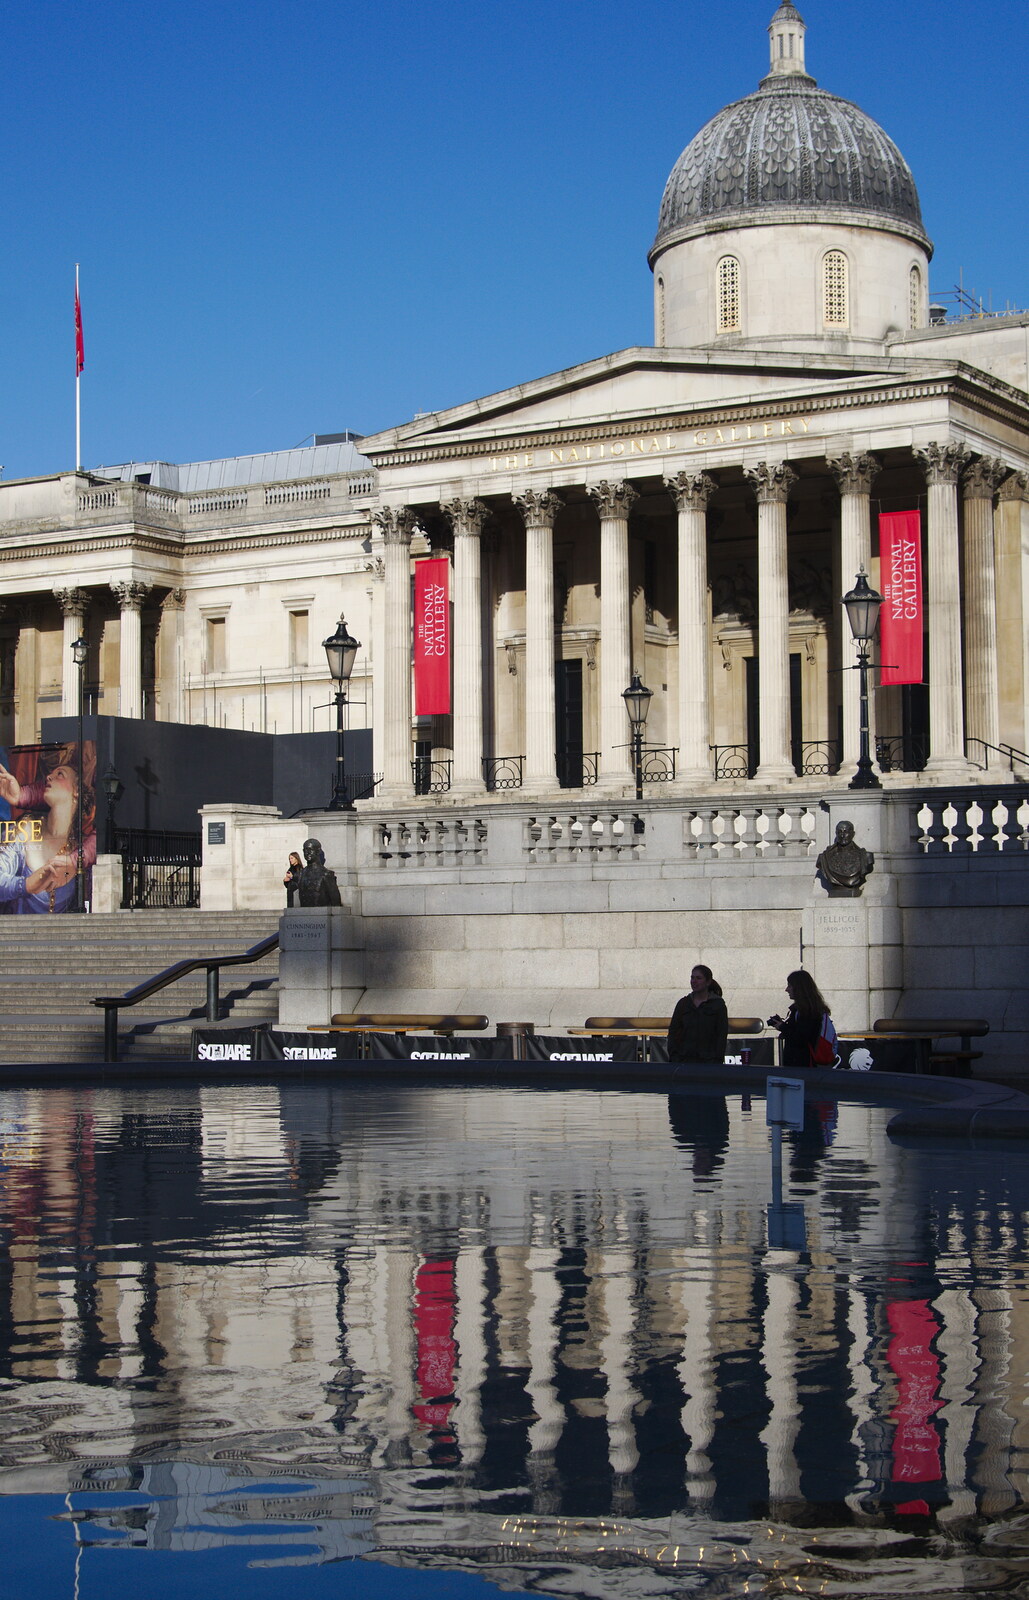 The National Gallery from SwiftKey Innovation, The Hub, Westminster, London - 21st February 2014